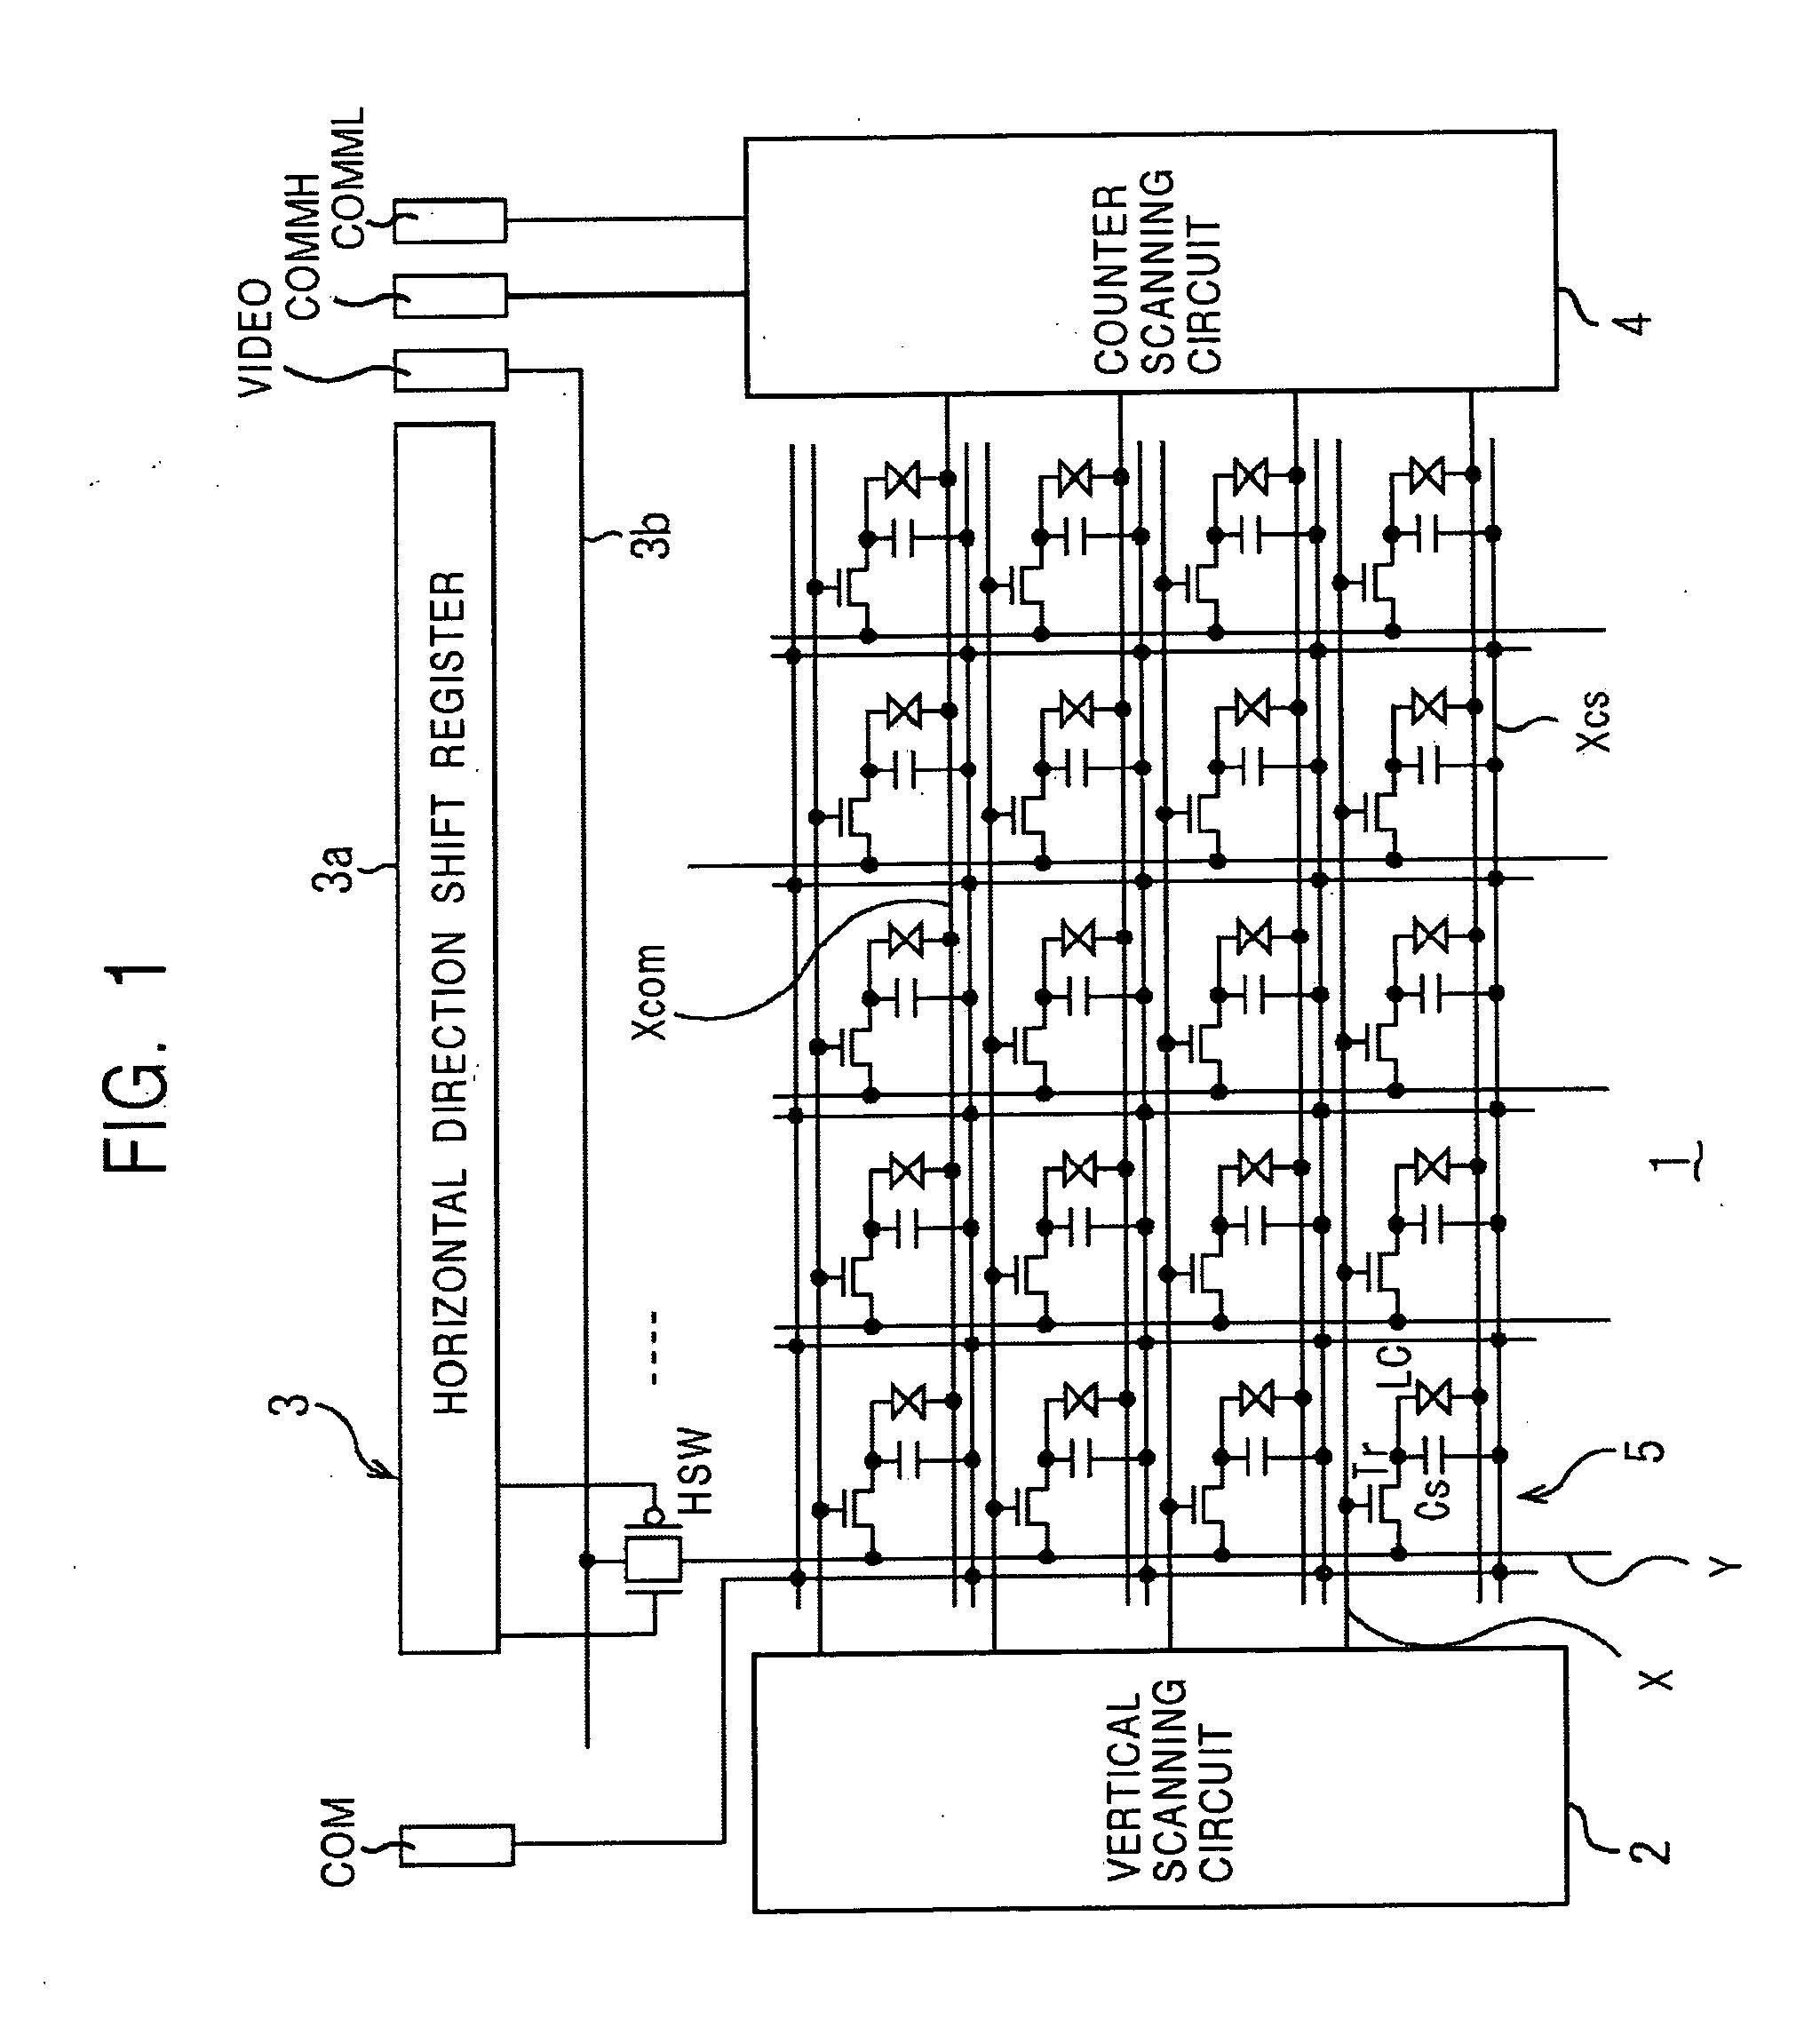 Display apparatus and driving method therefor